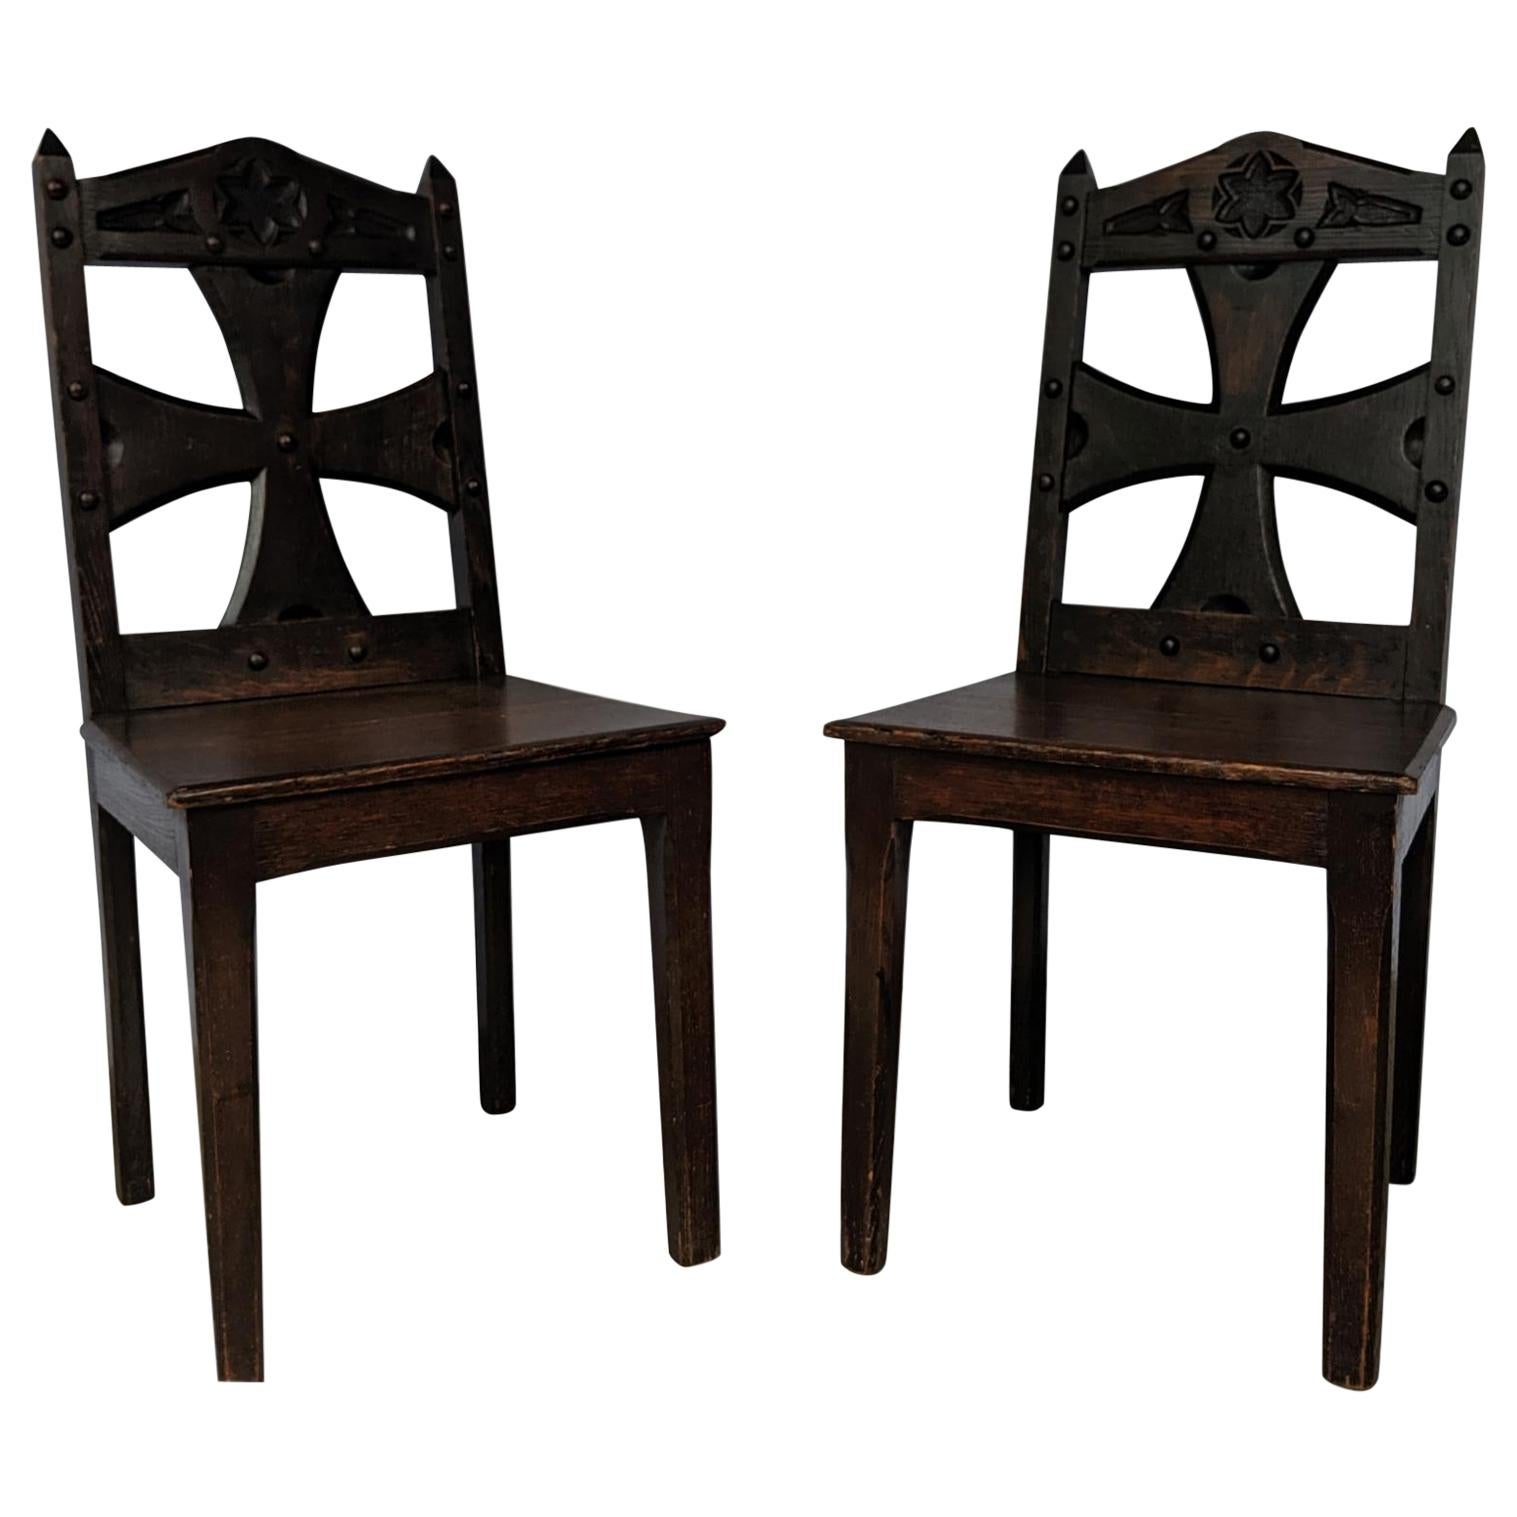 Pair of Hand Carved Oak Gothic Chairs, Arts & Crafts Movement, Scottish